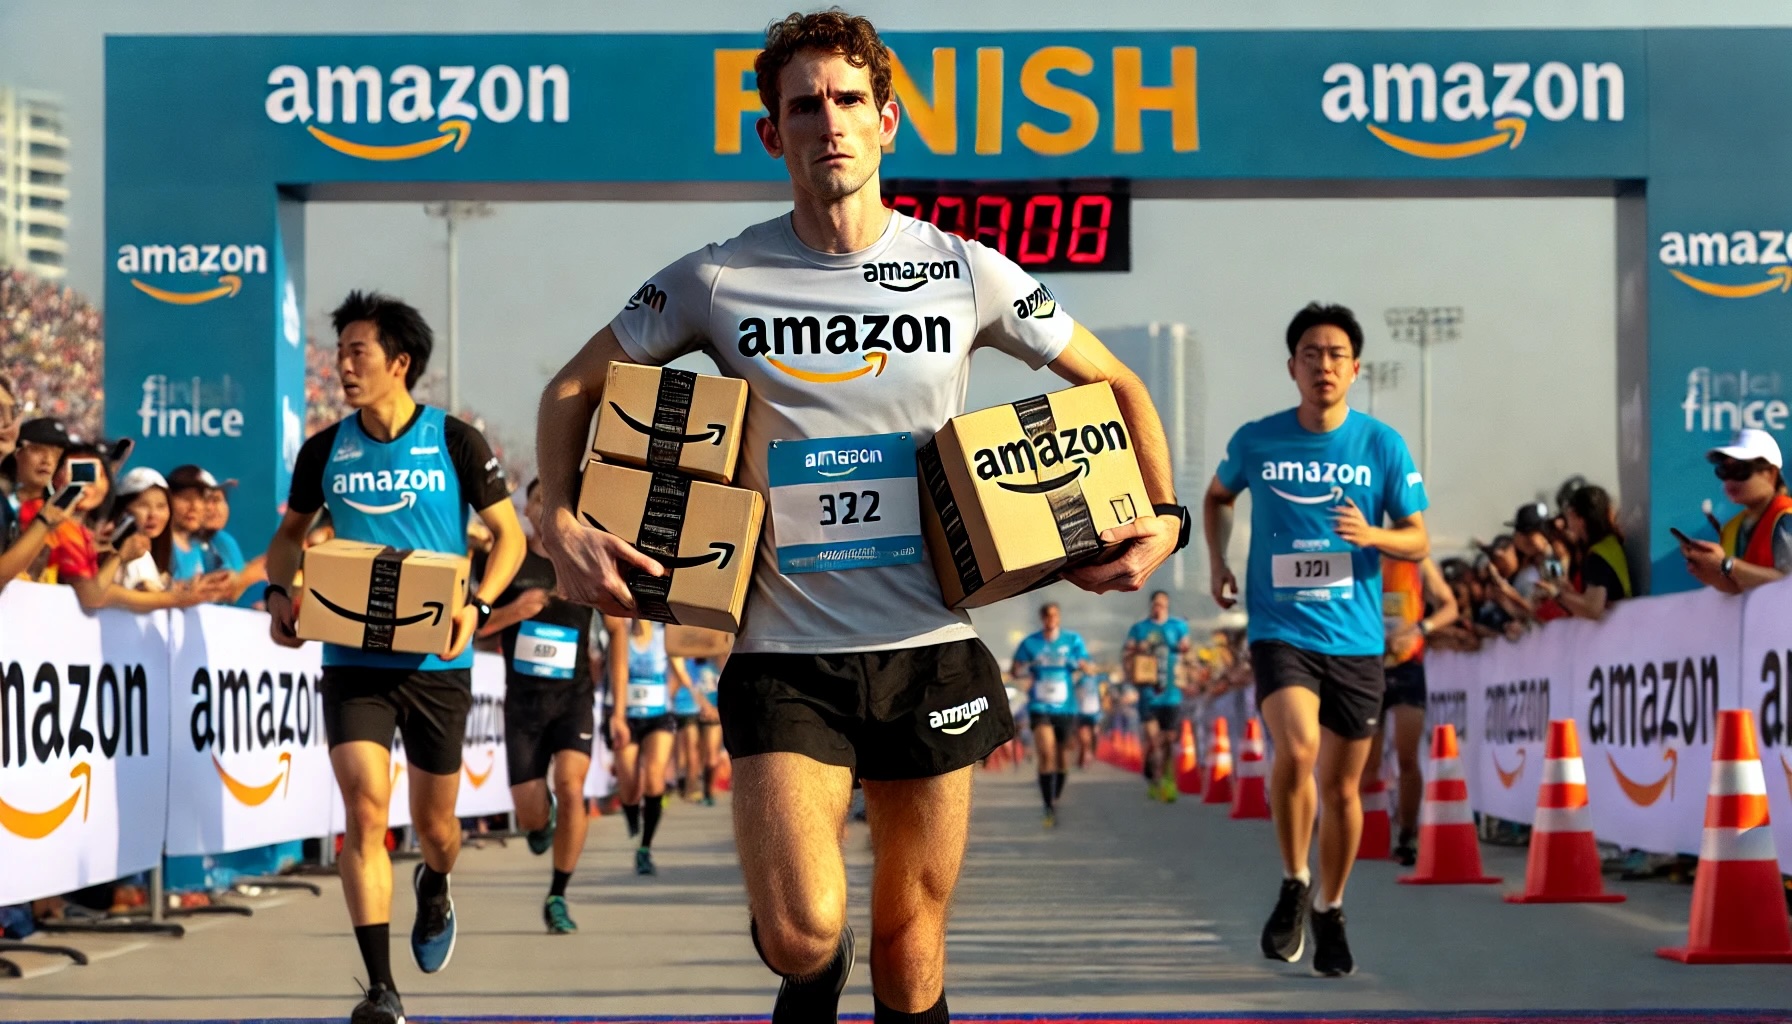 a runner wearing an amazon branded shirt carrying amazon boxes running across a finish line in front of a number of competitors